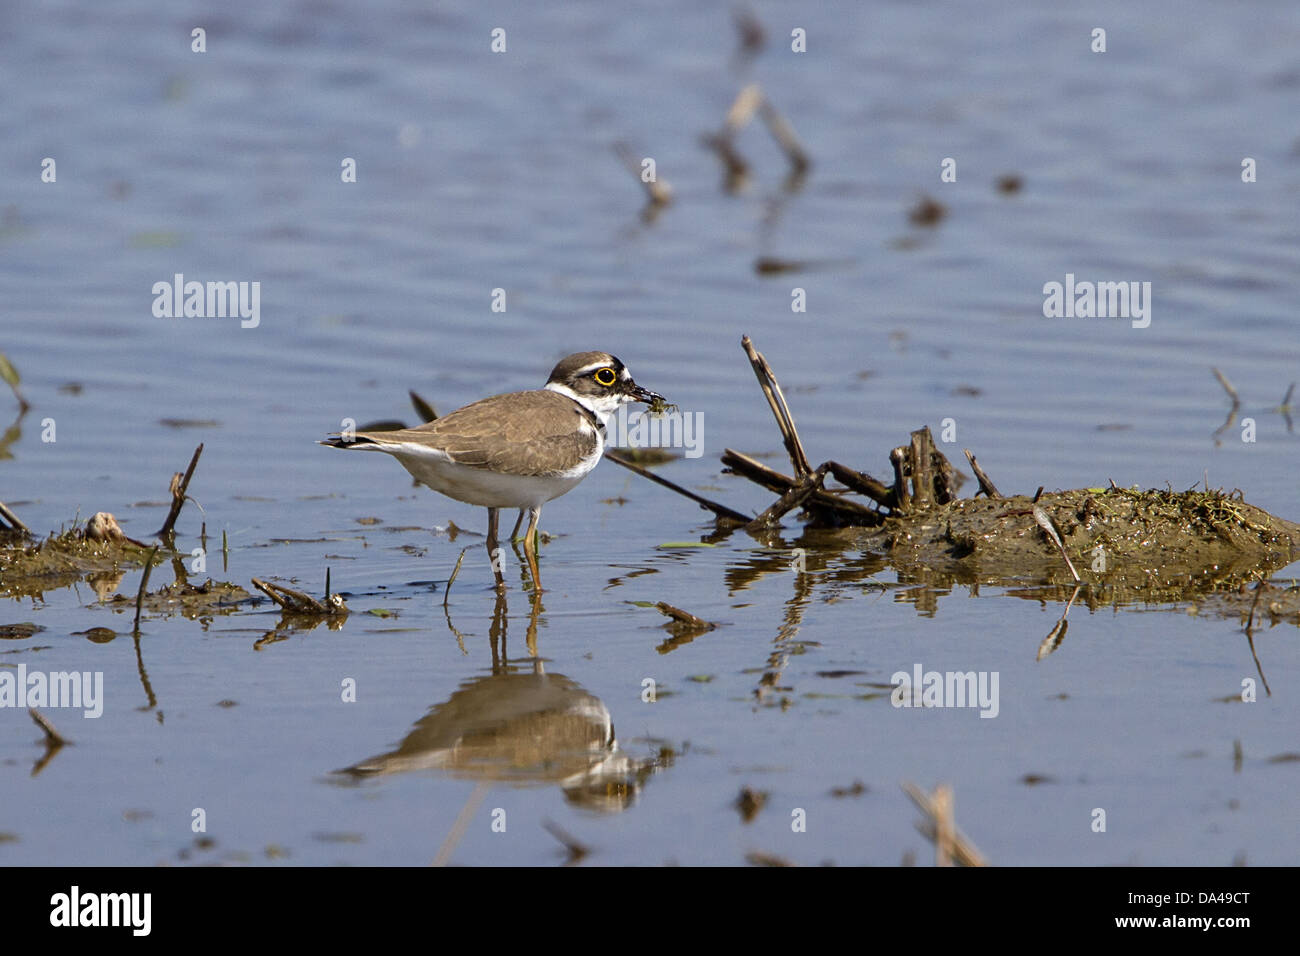 Little ringed Plover with prey item. Stock Photo